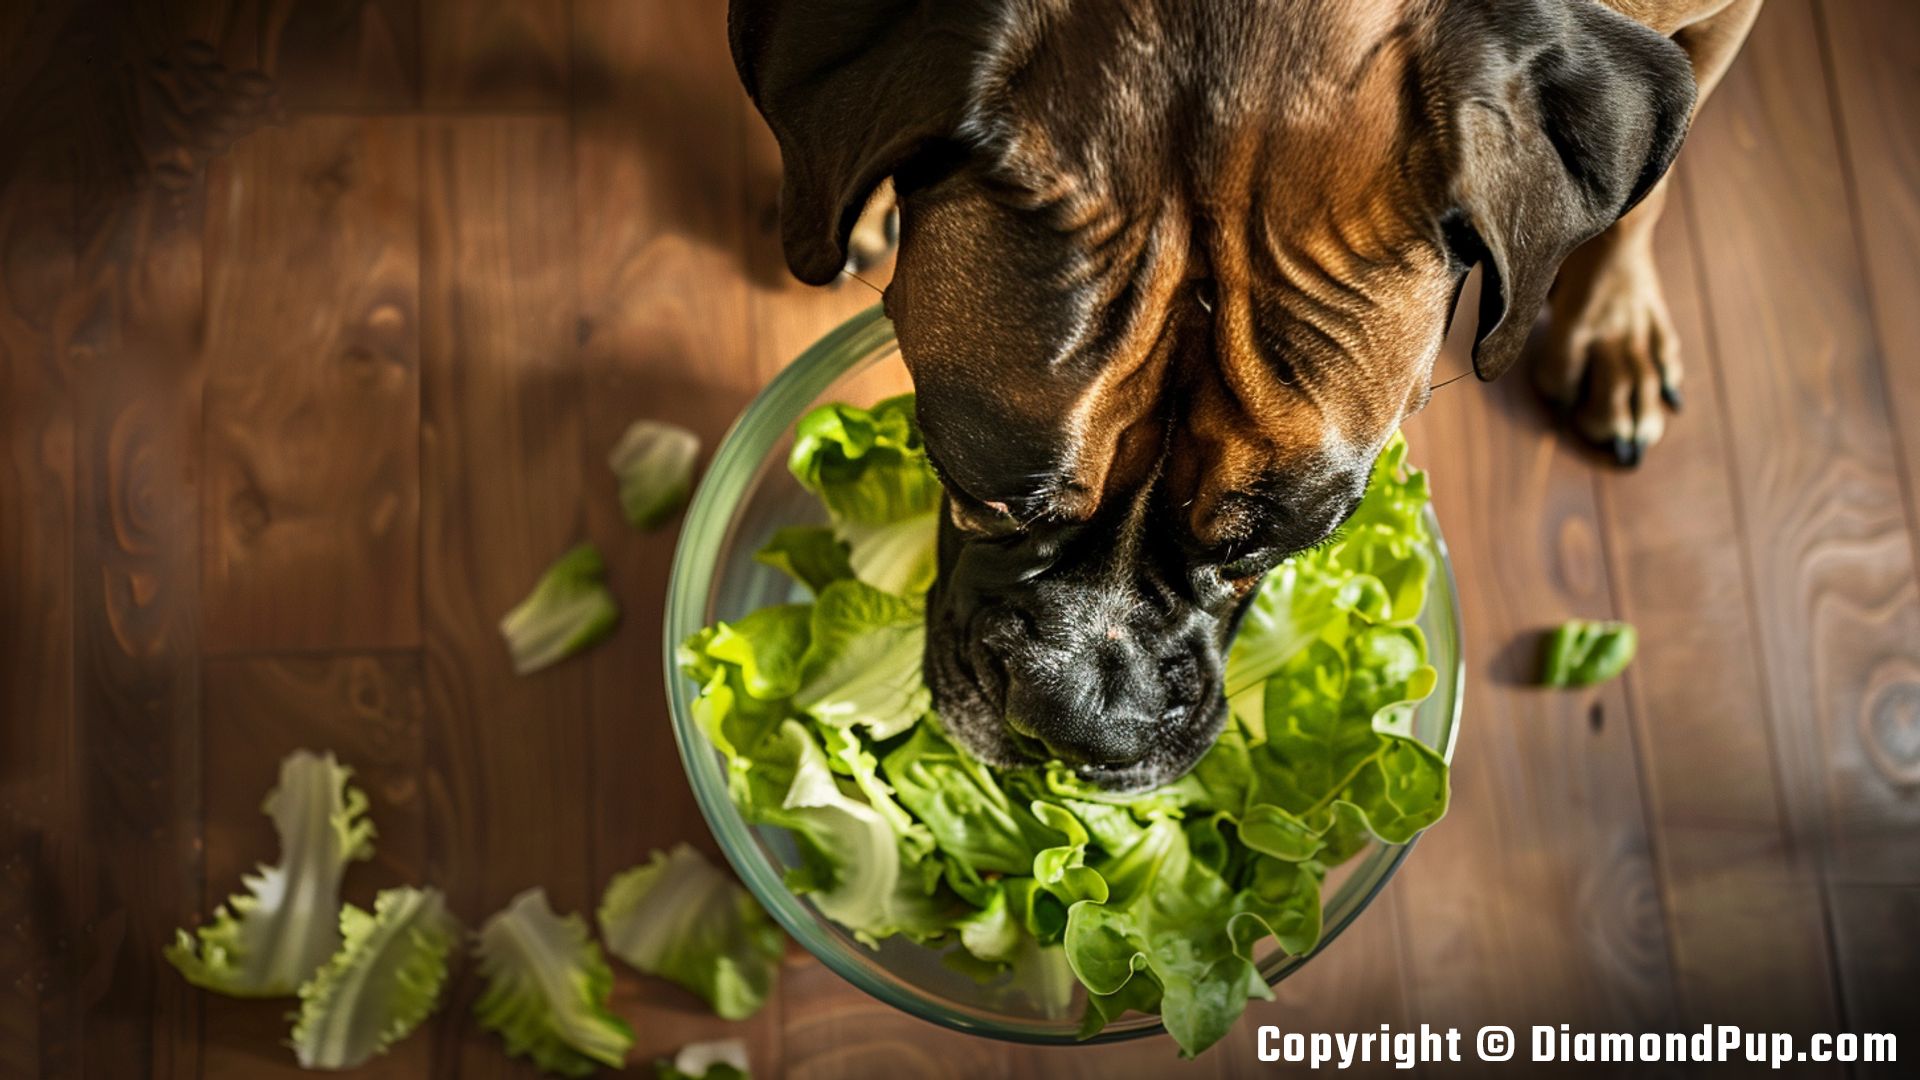 Photograph of a Playful Boxer Eating Lettuce